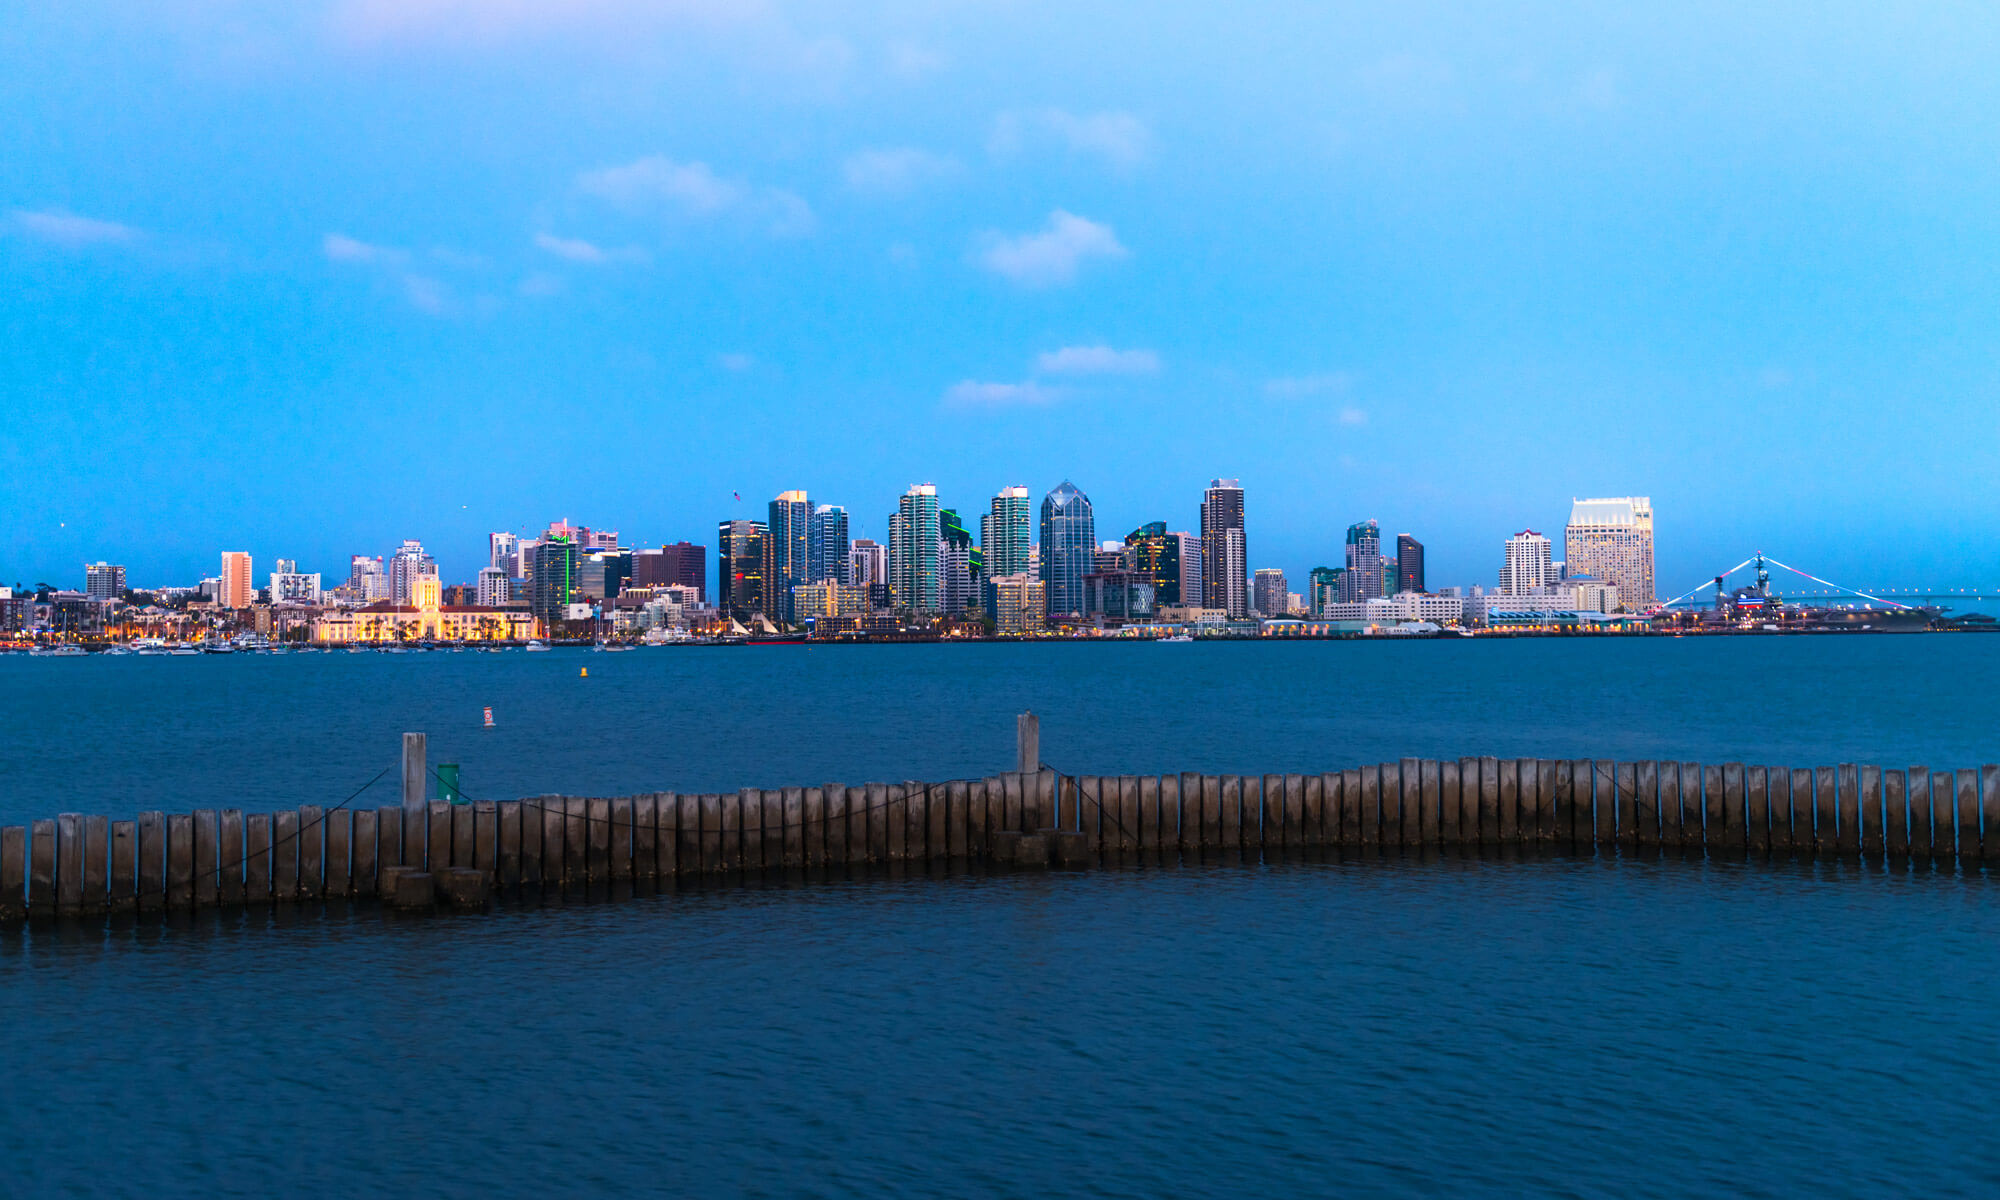 A view of San Diego's skyline from across the bay at sundown